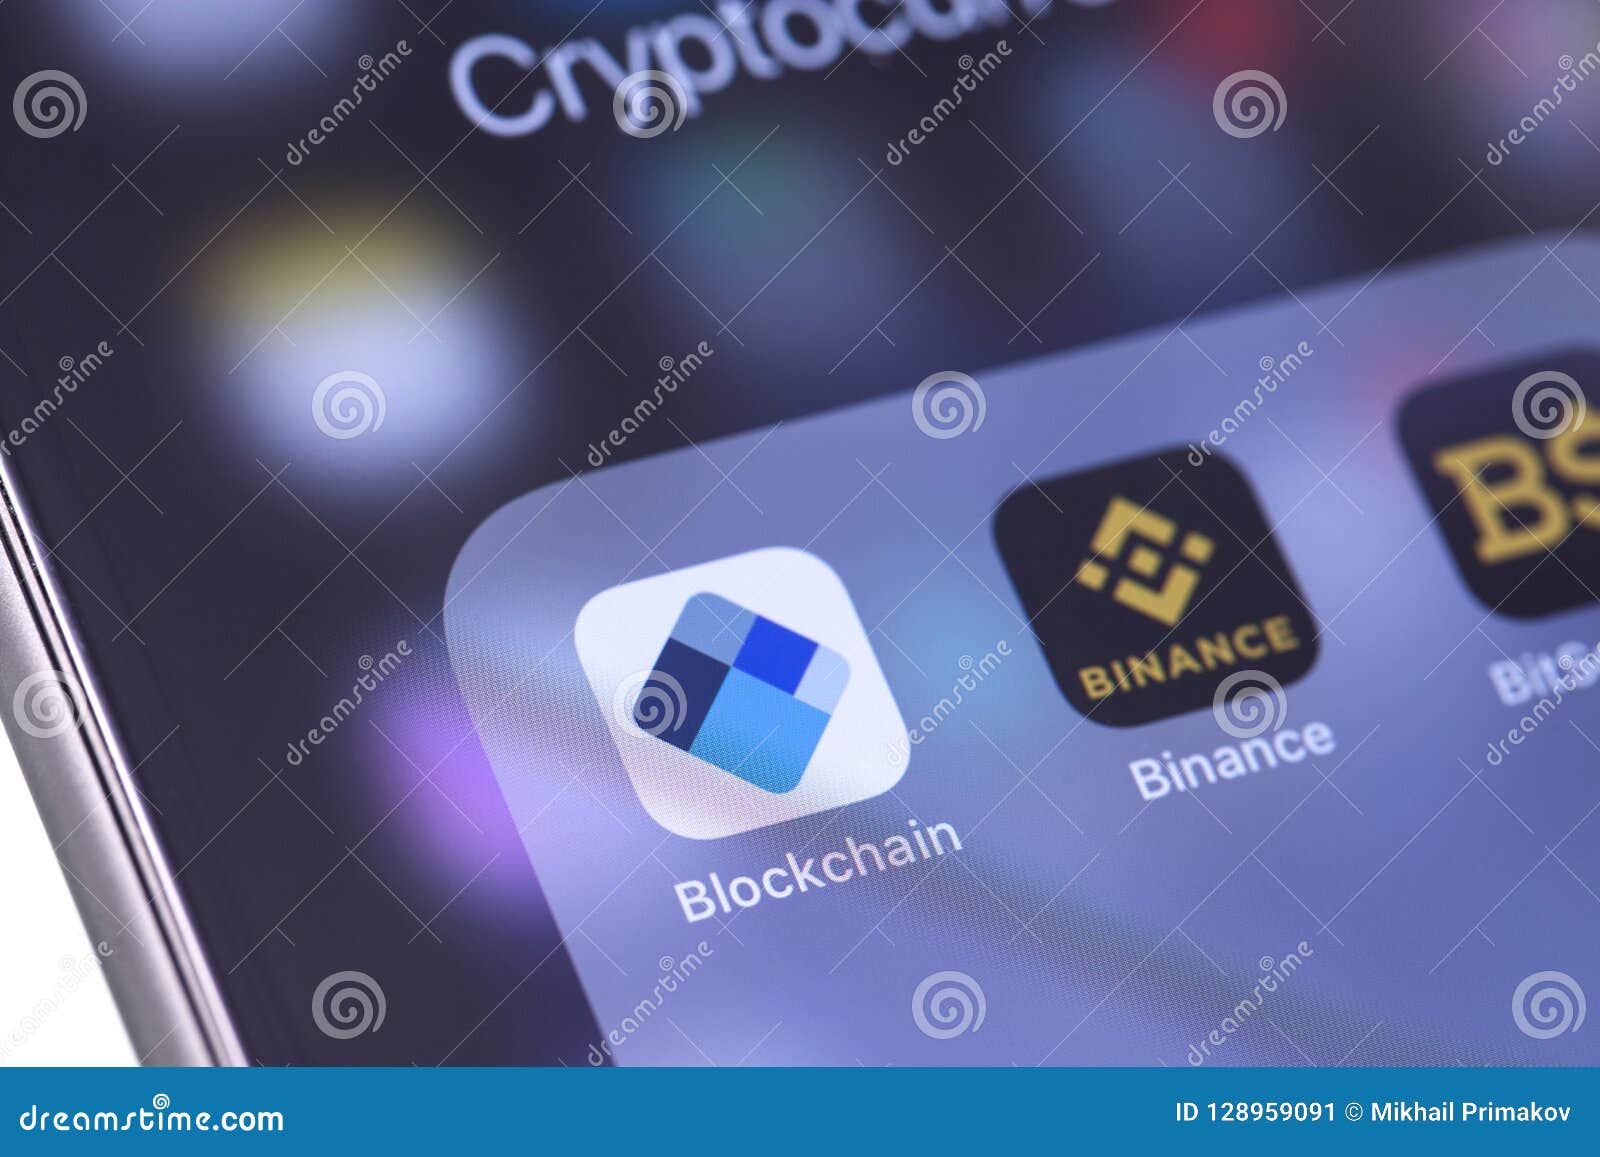 Blockchain App And Binance - Cryptocurrency Exchange Icons ...